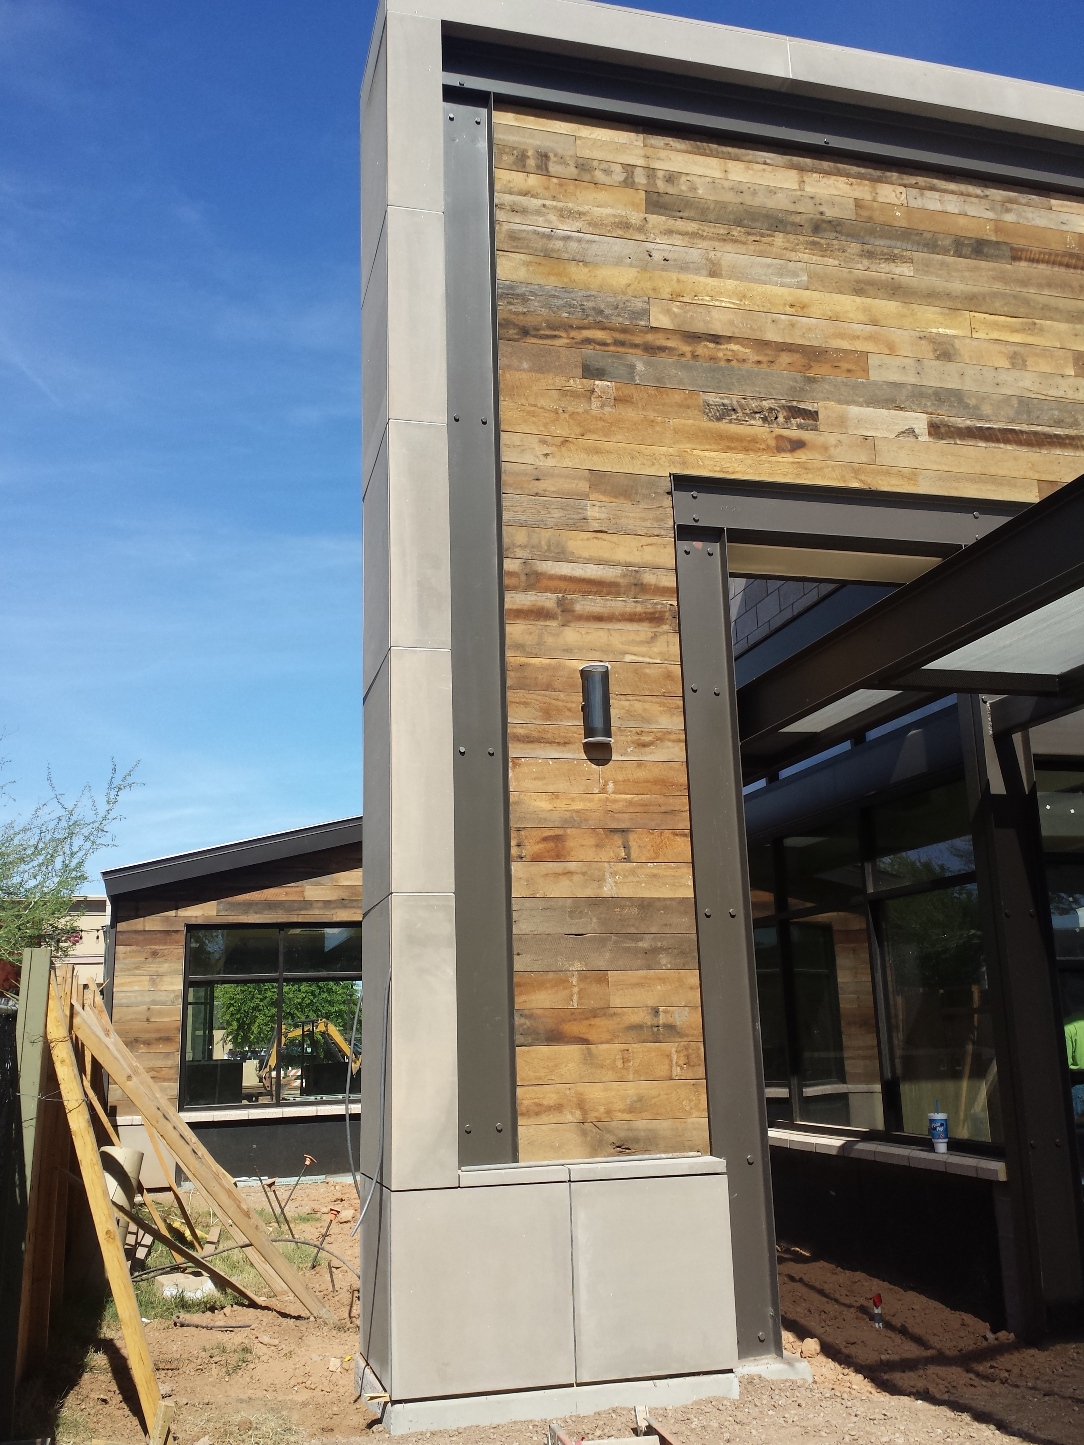 AAS Plant: Mesa Precast in Tempe, AZ | Architectural GFRC Panels Veneer Adding Accent to Wood and Steel Elevation - Gilbert Snooze Restaurant, AZ